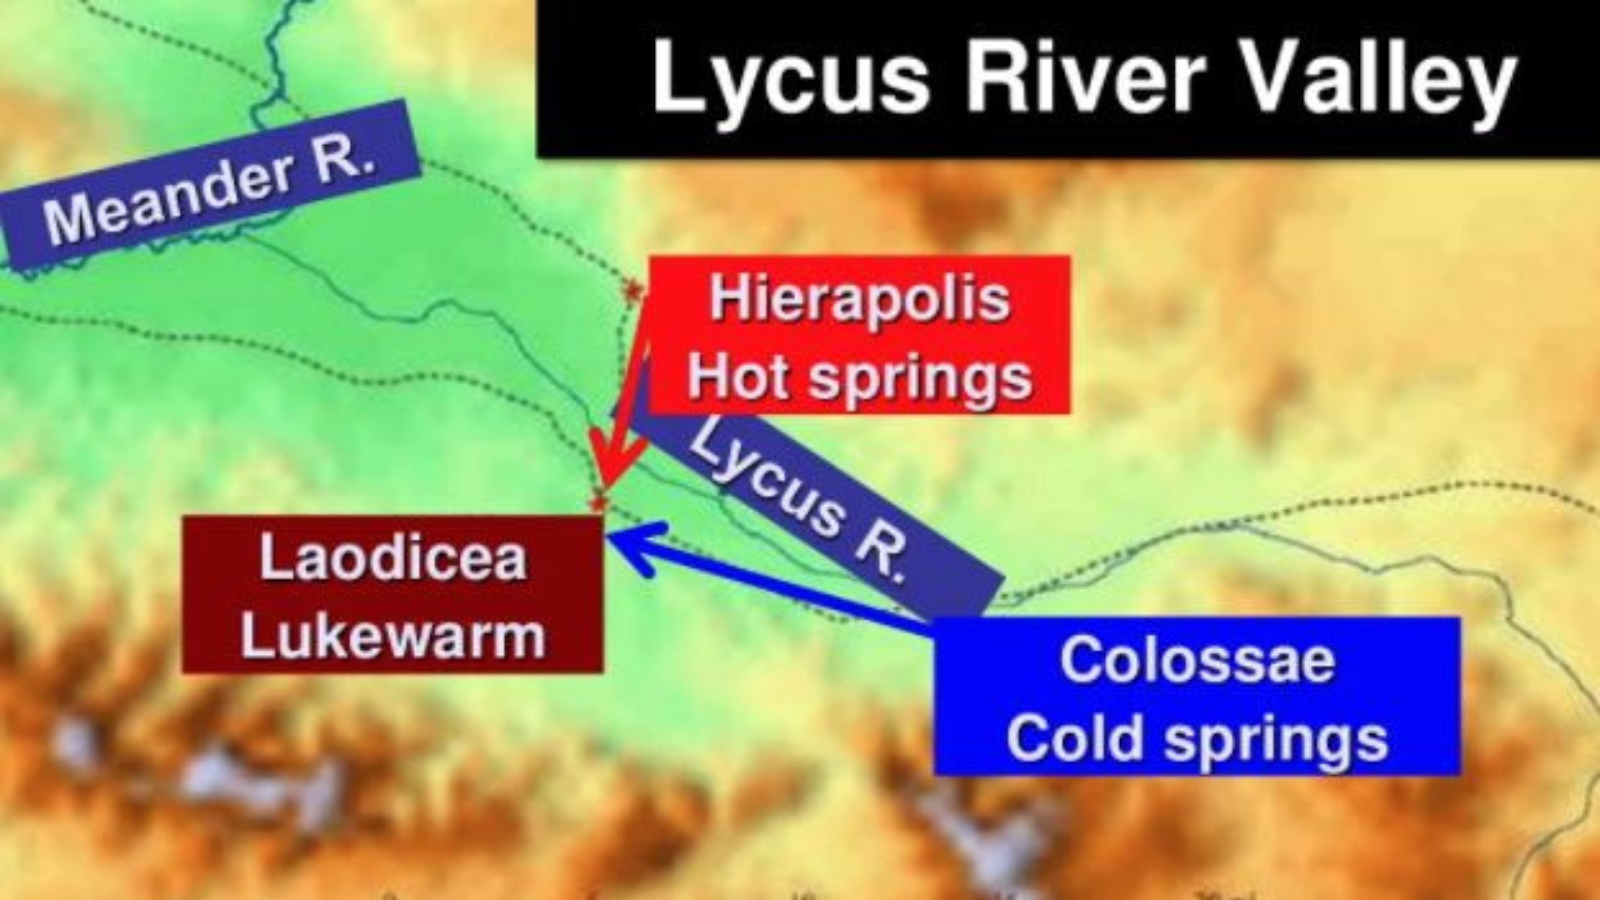 Lycus river valley showing lukewarm water